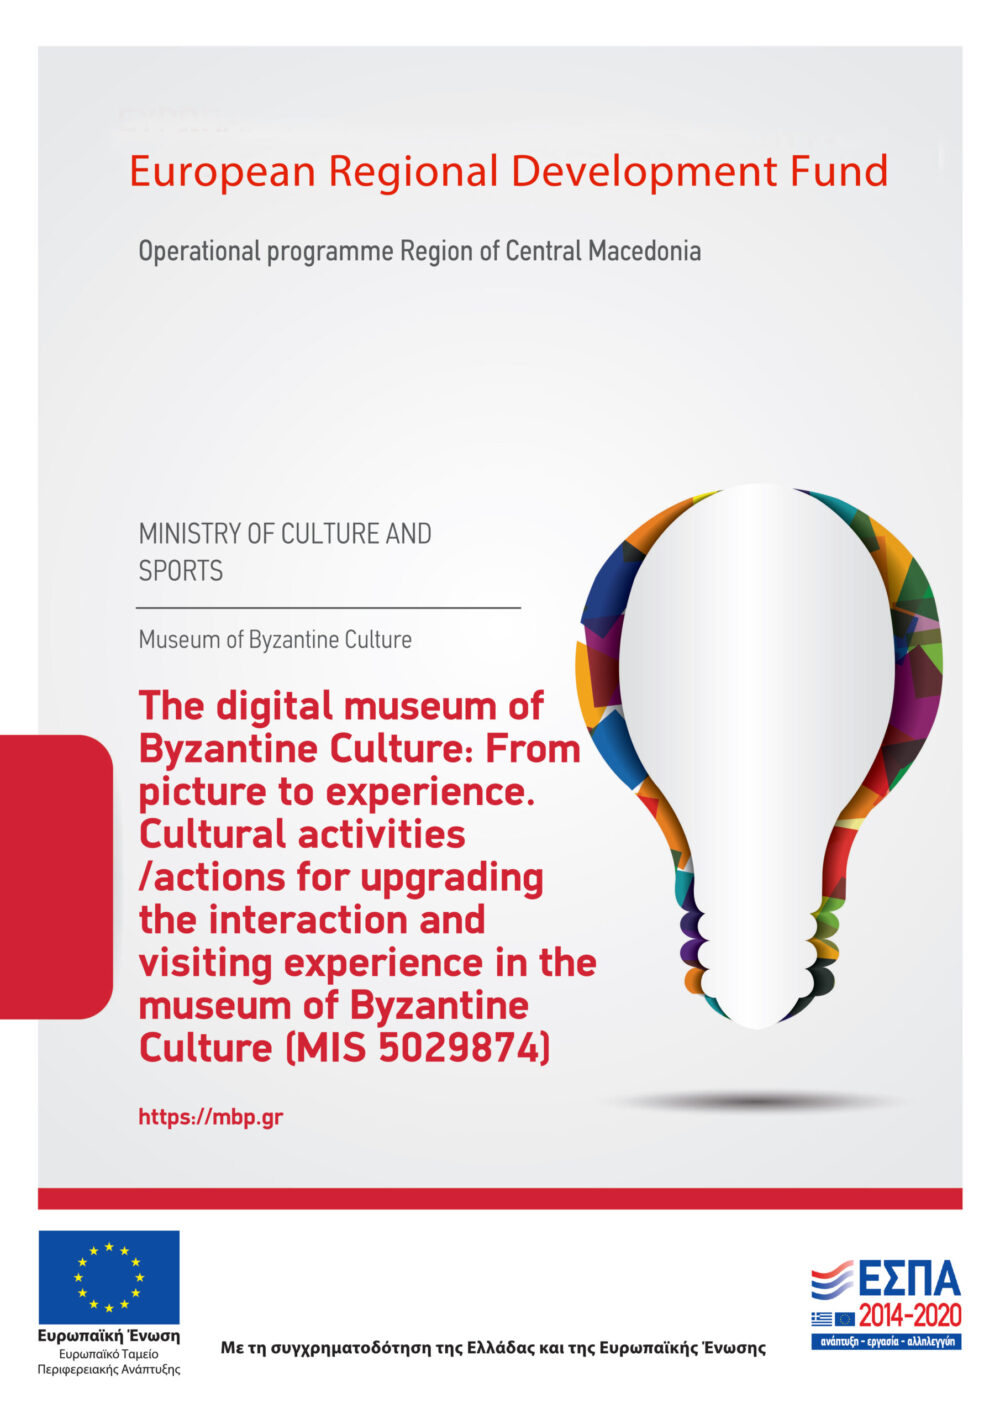 From image to experience. Actions for the upgrade of the interactivity and experience of a visit to the Museum of Byzantine Culture